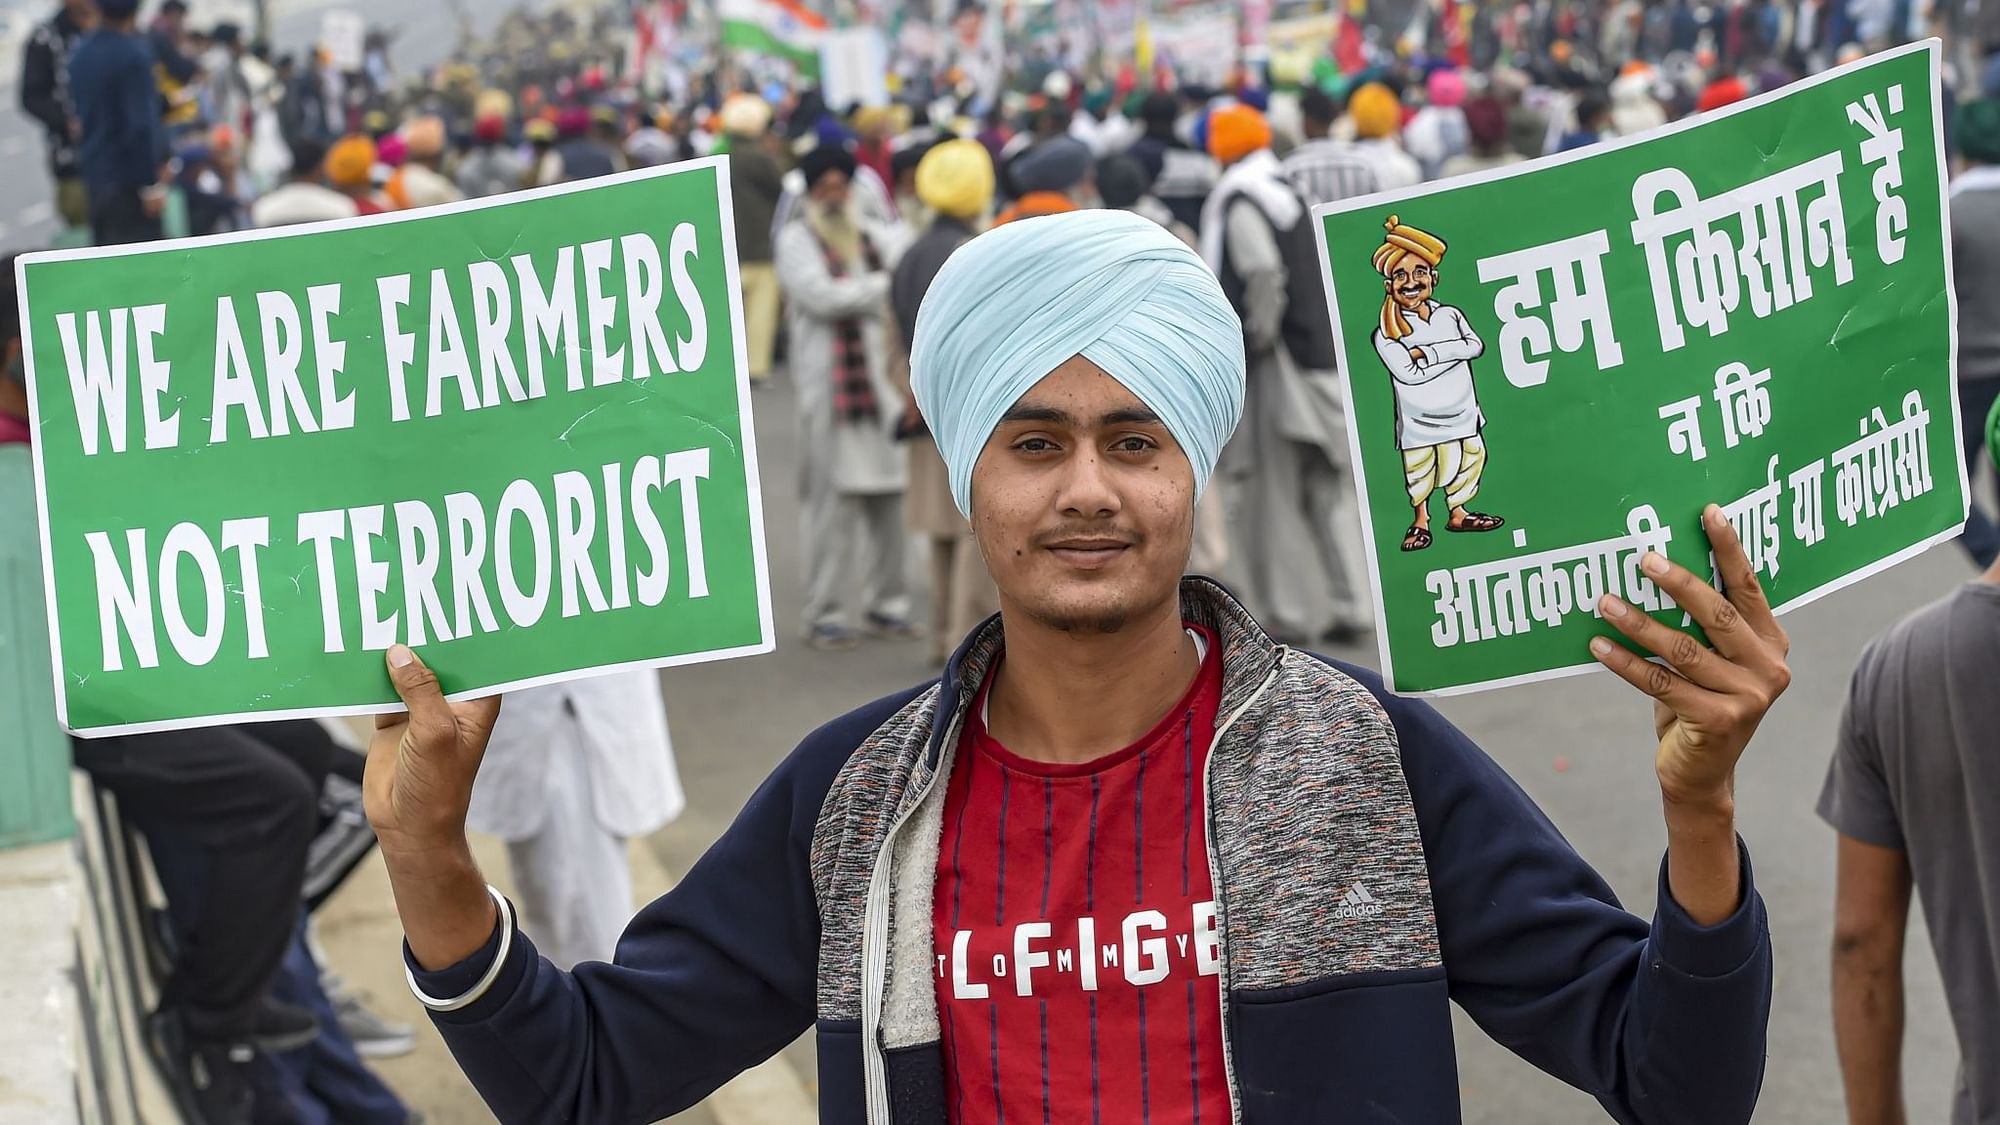 New Delhi: A farmer holds placards during a protest march against Centres agri-laws, at Delhi-Meerut Expressway in New Delhi, Friday, Dec. 11, 2020.